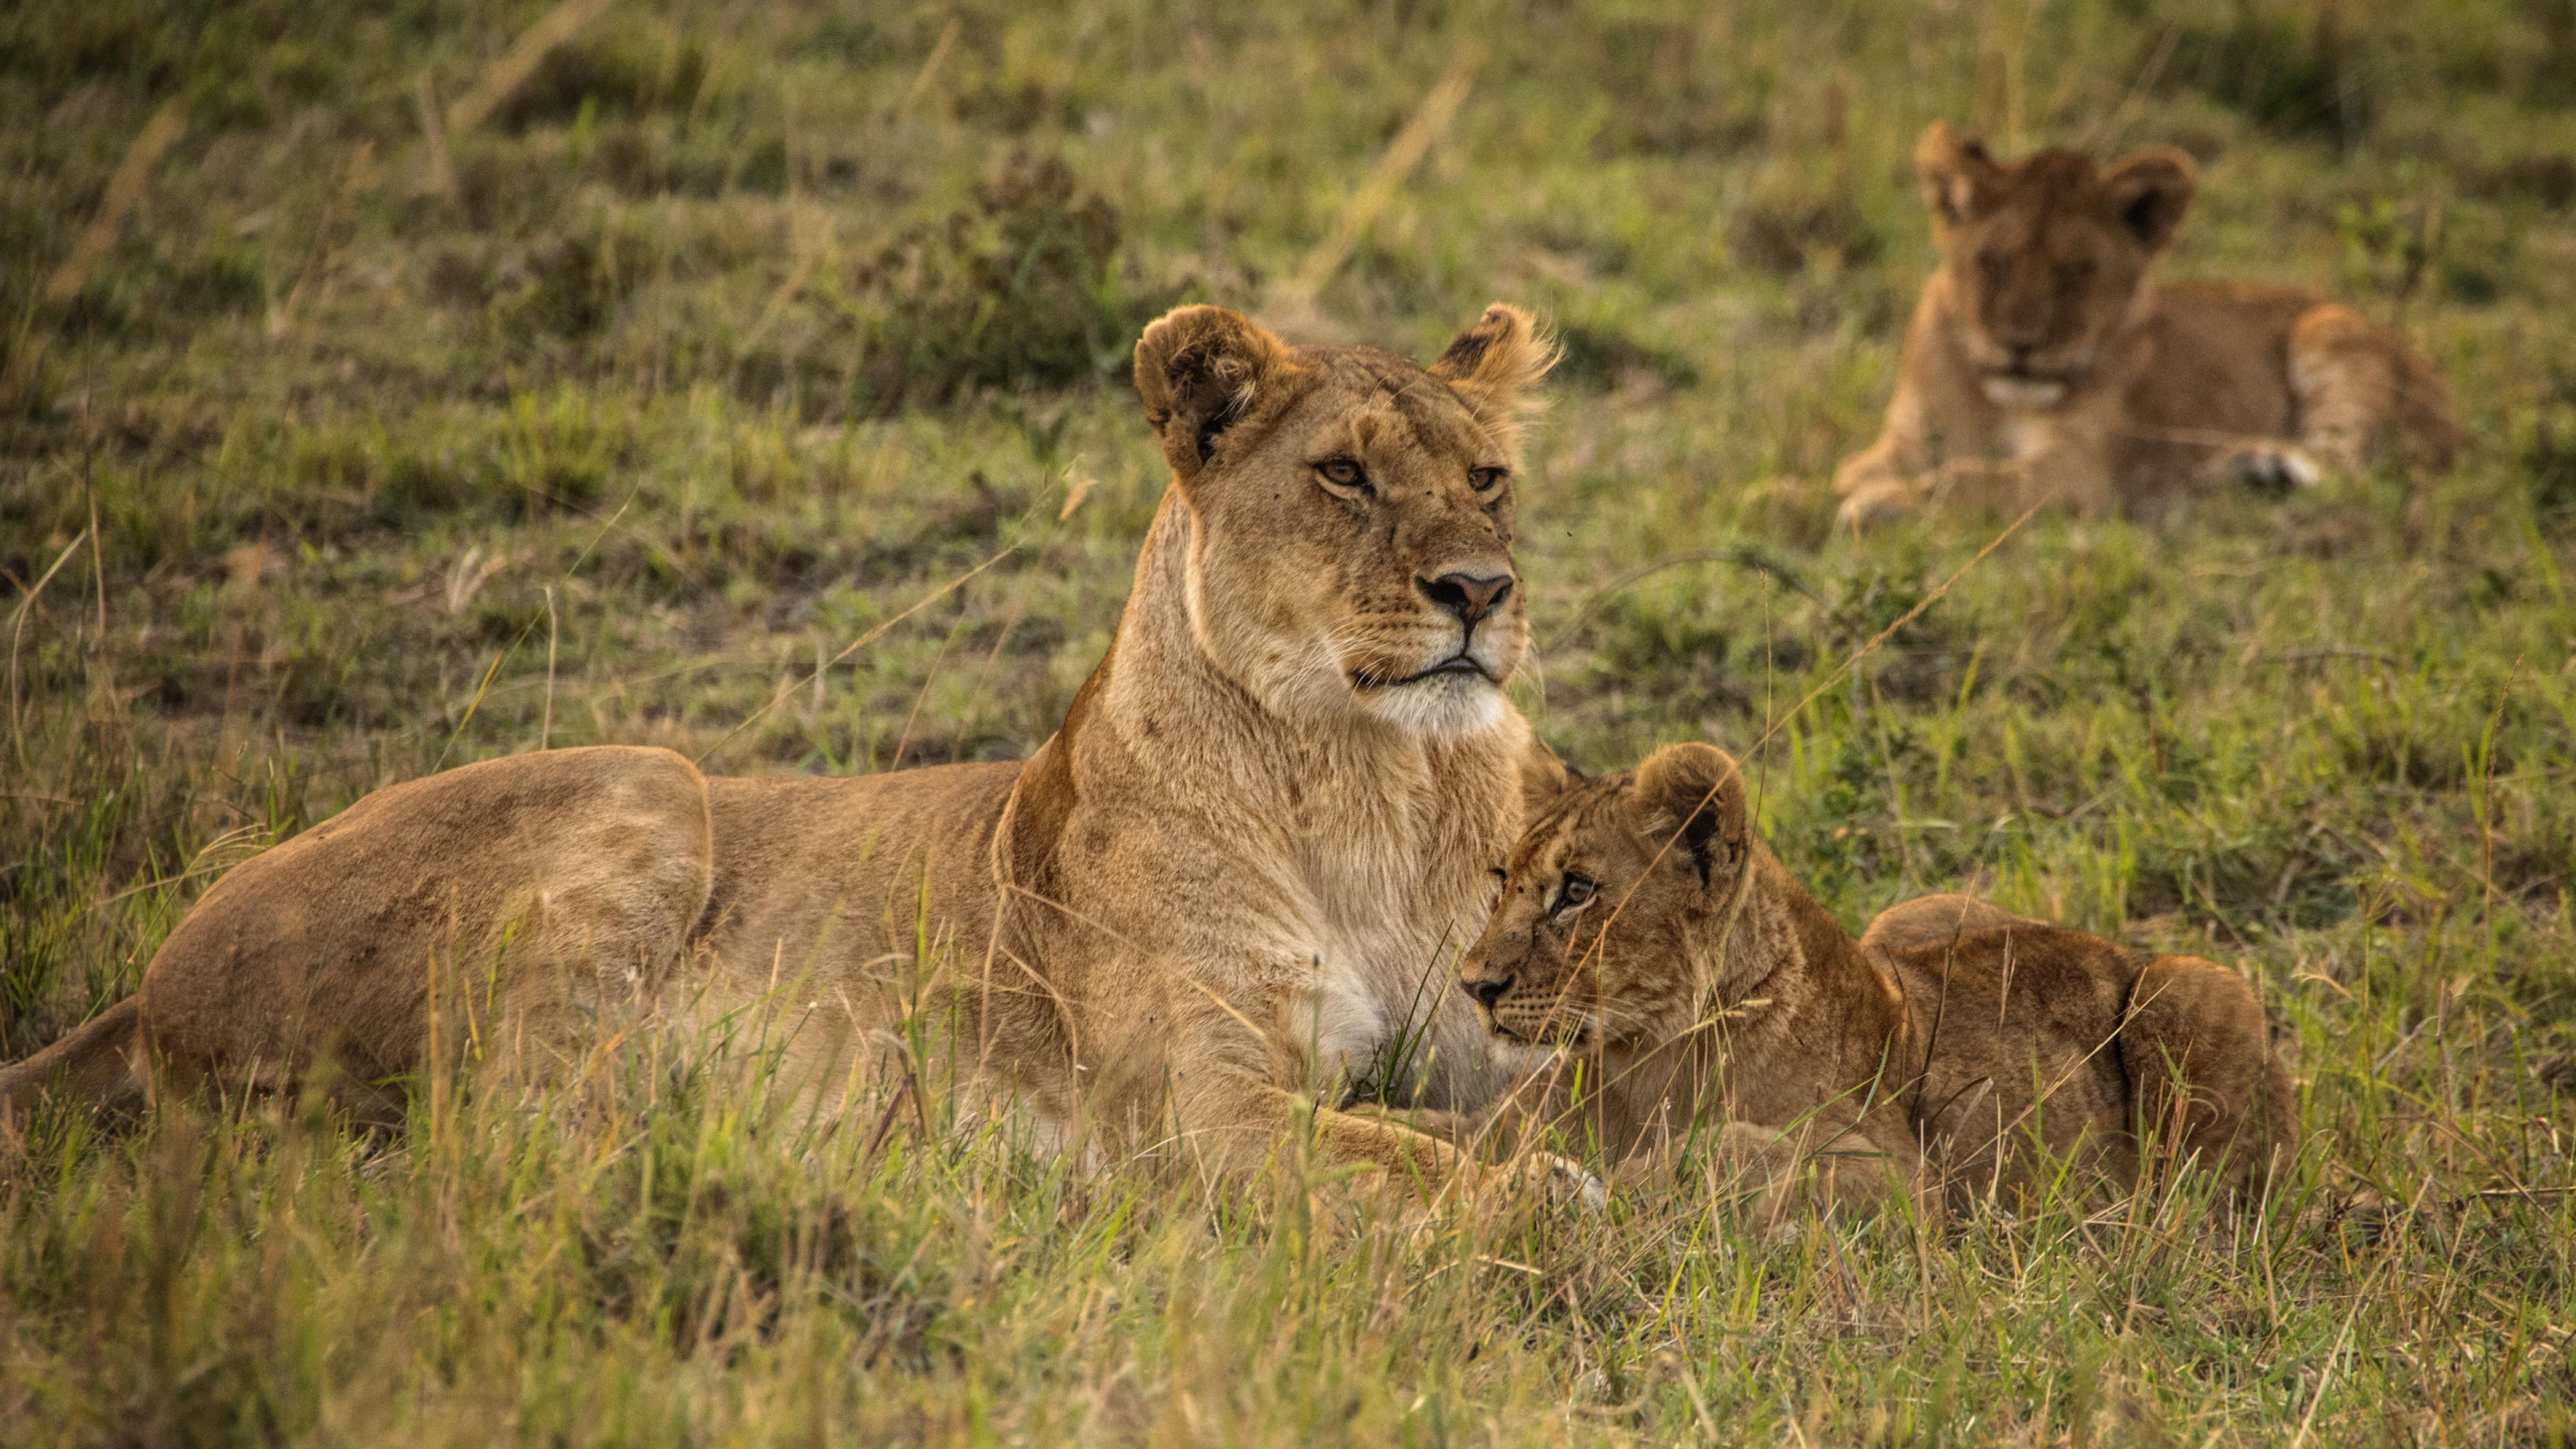 Lioness with cubs from Serengeti wallpaper 2880x1620